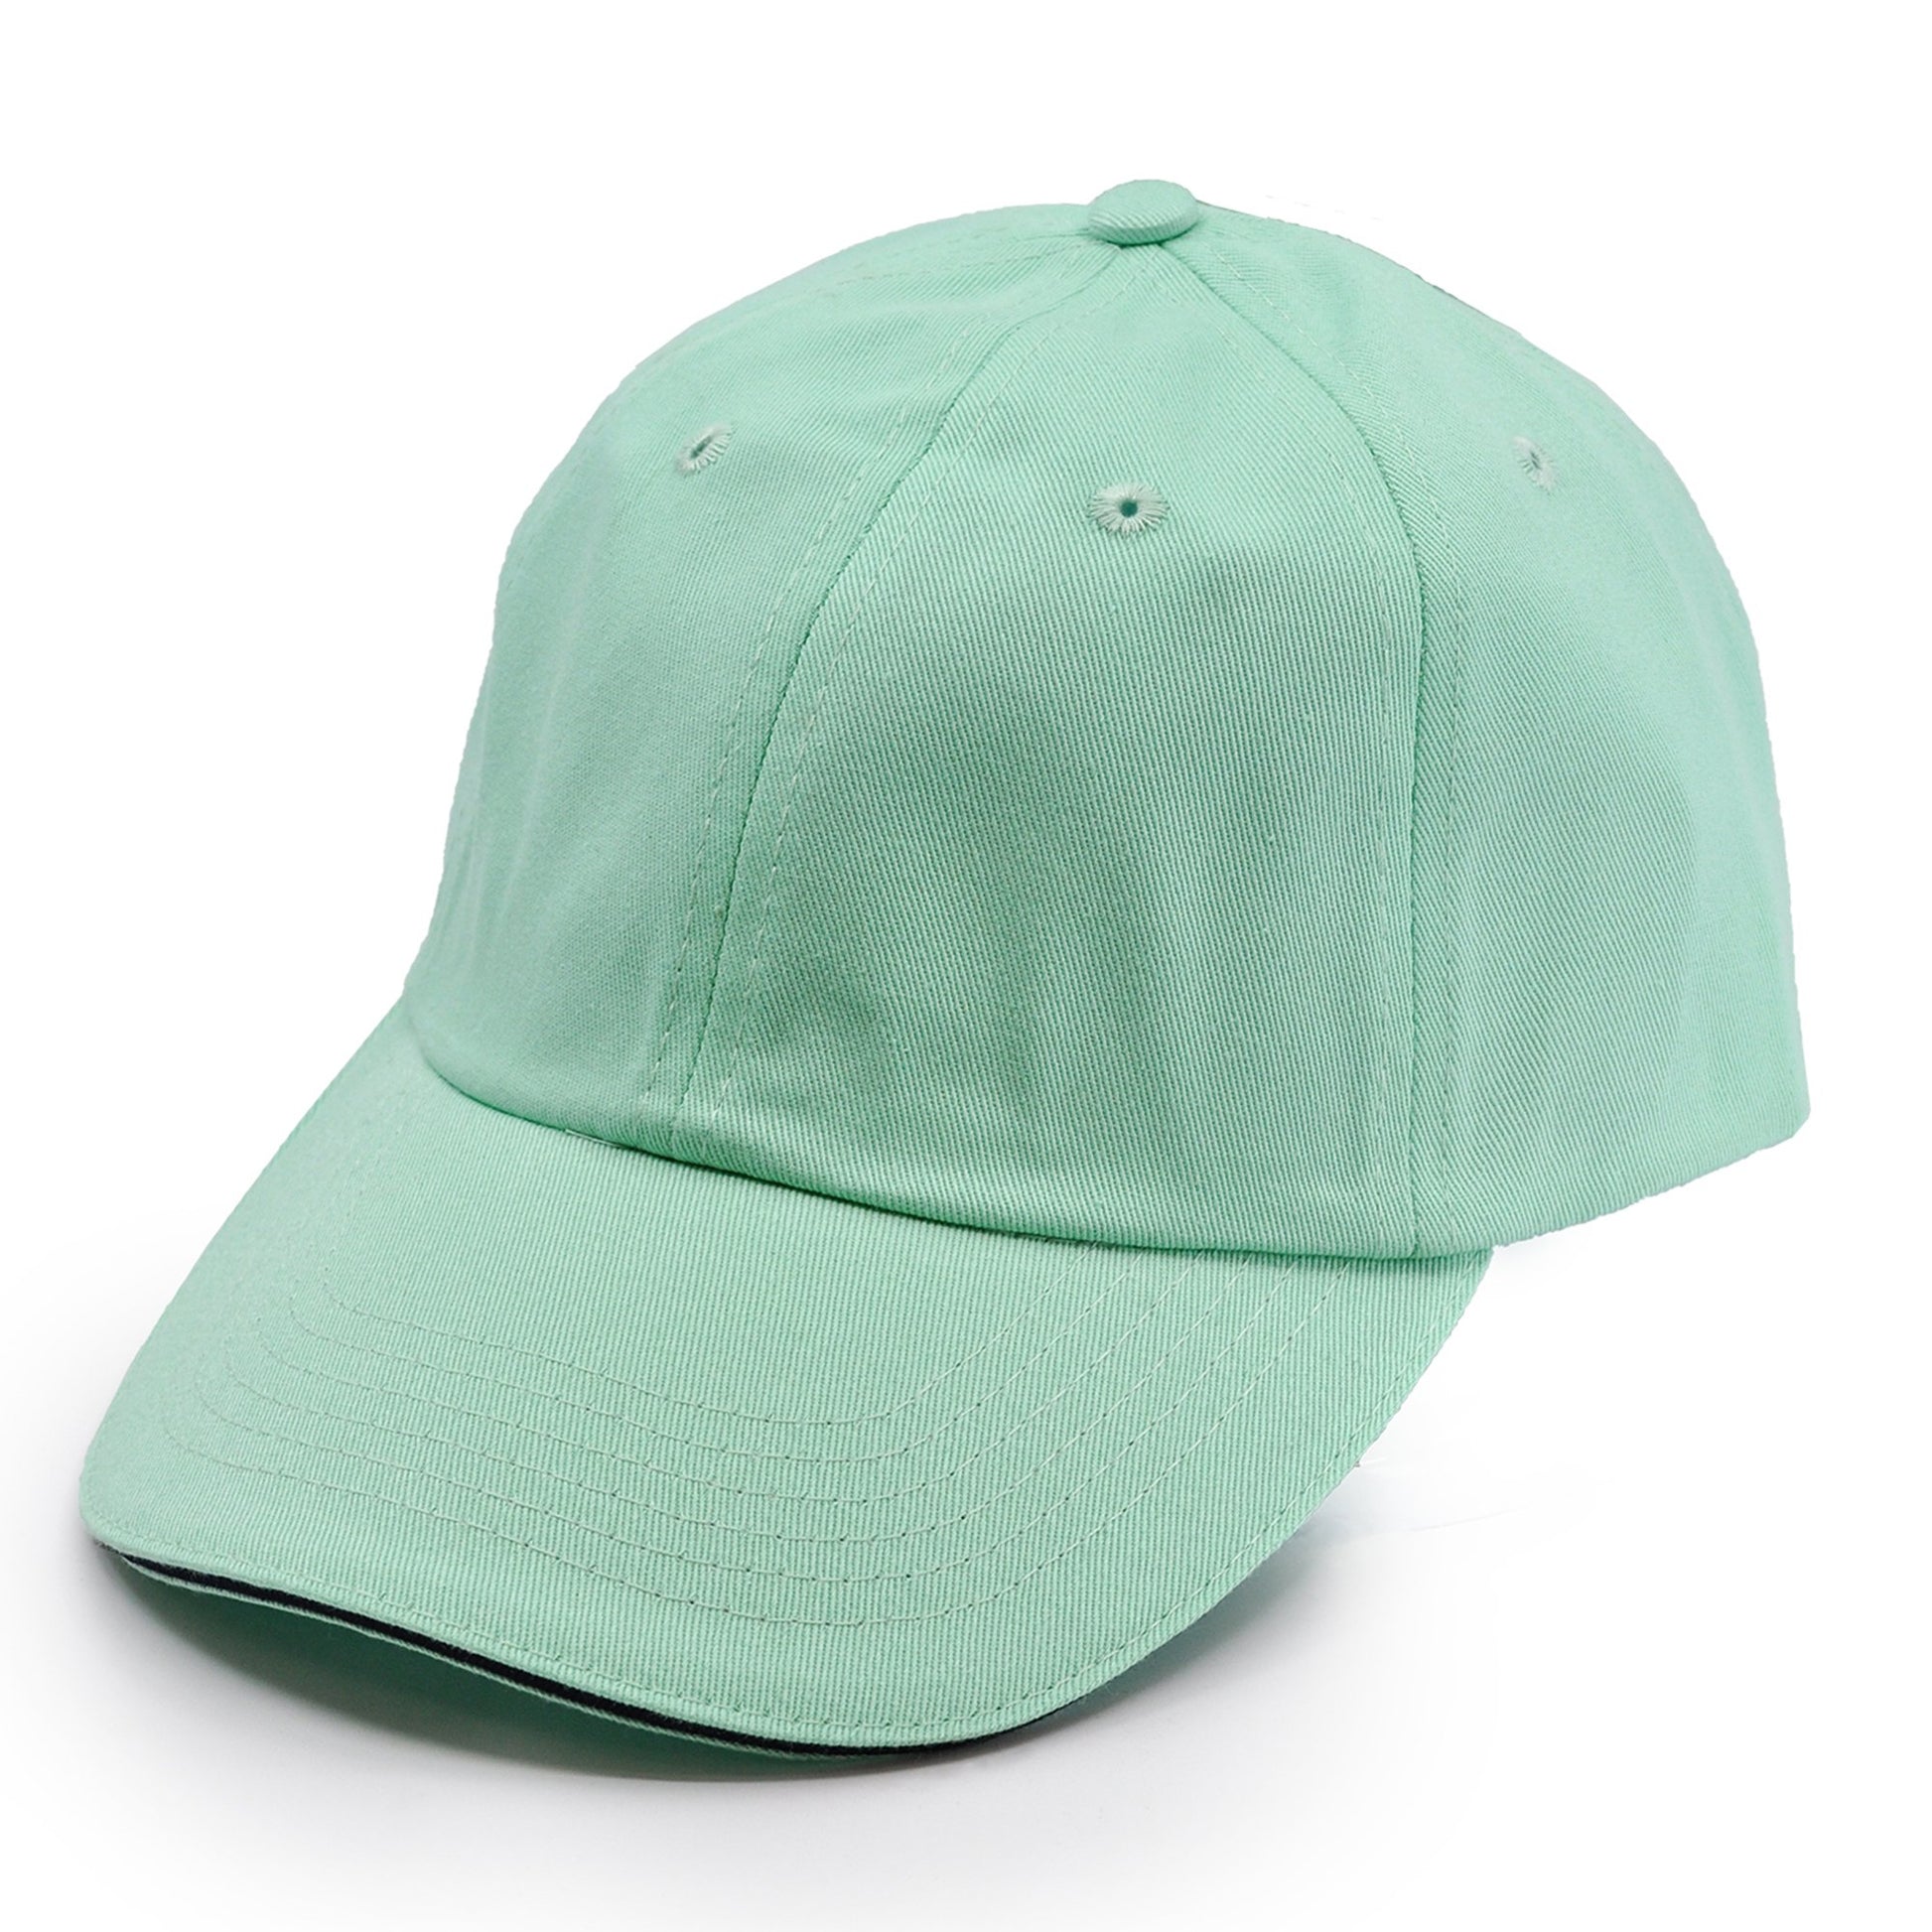 River Beach 100% Cotton Unisex Sports Cap, in color Mint Green. Front View.